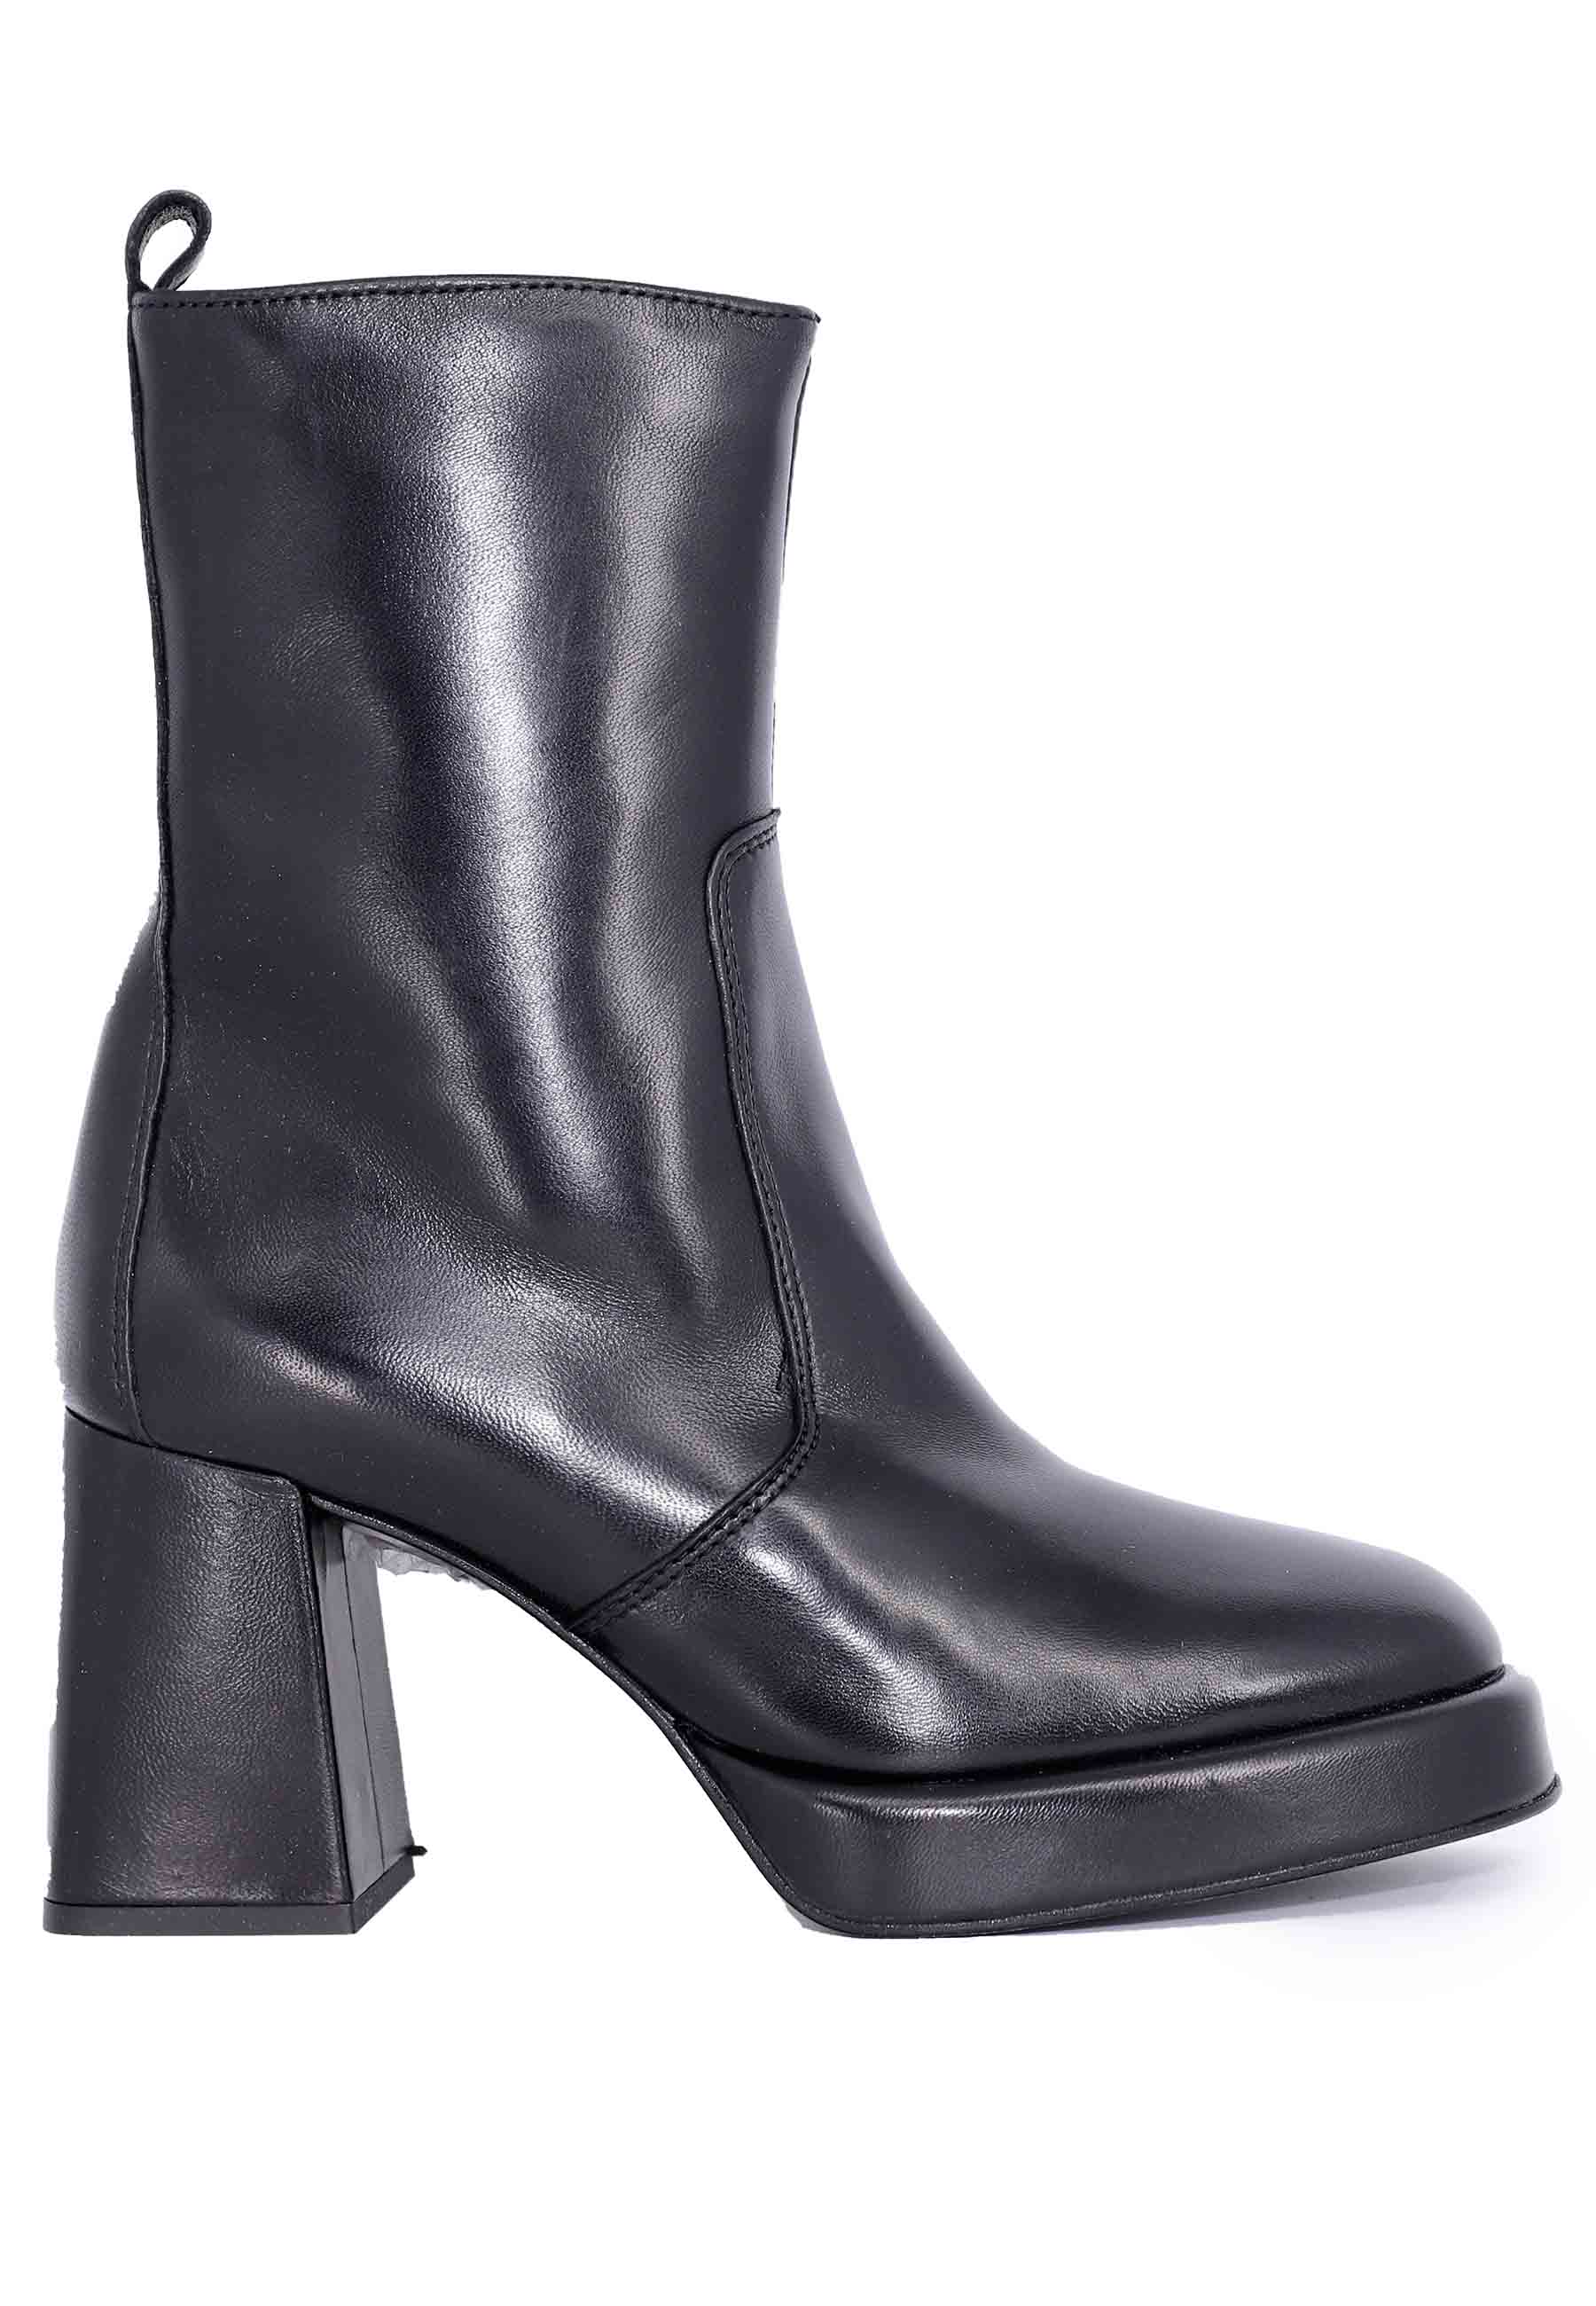 Women's black leather ankle boots with high heel and platform